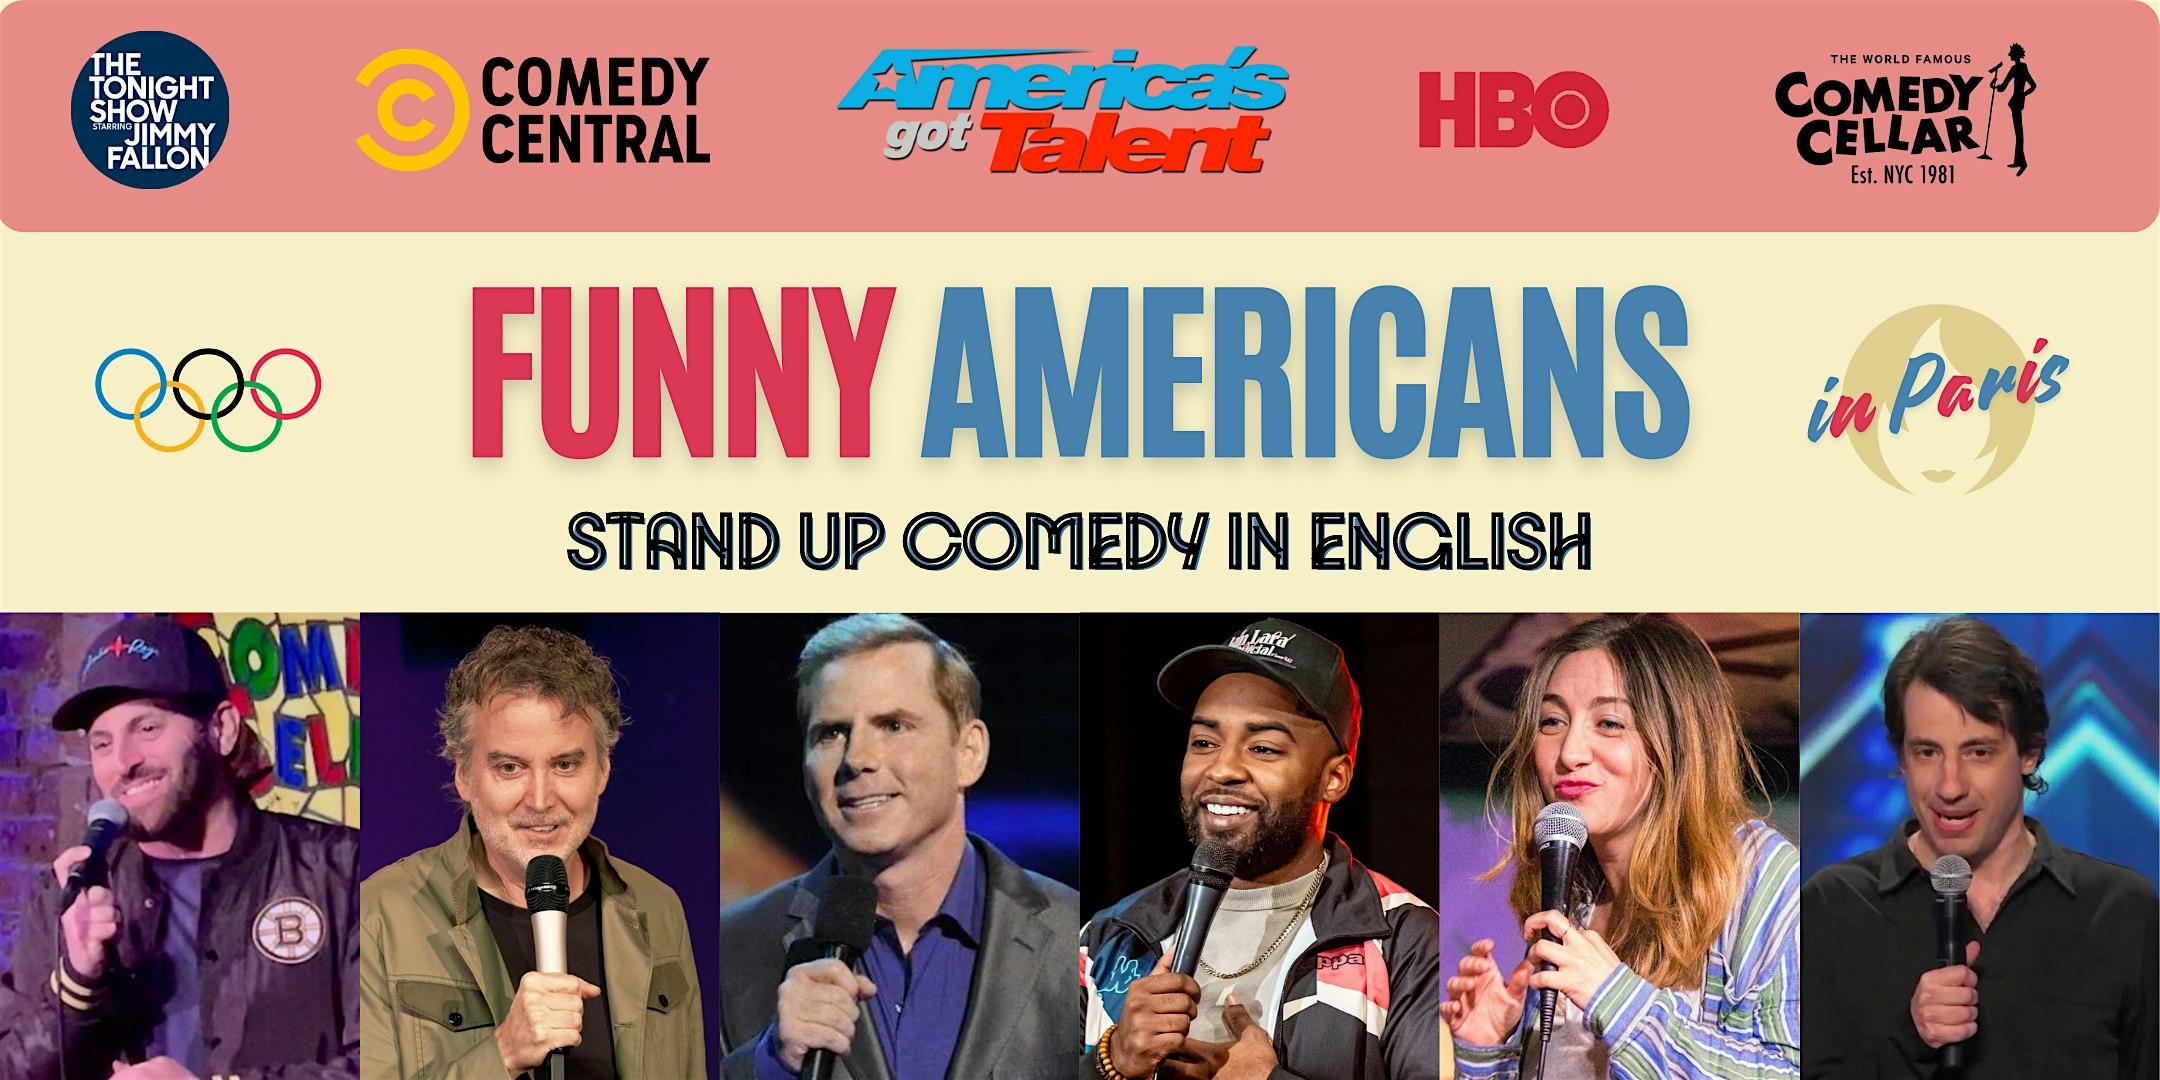 FUNNY AMERICANS in Paris - TOP NYC stand up comedians logo